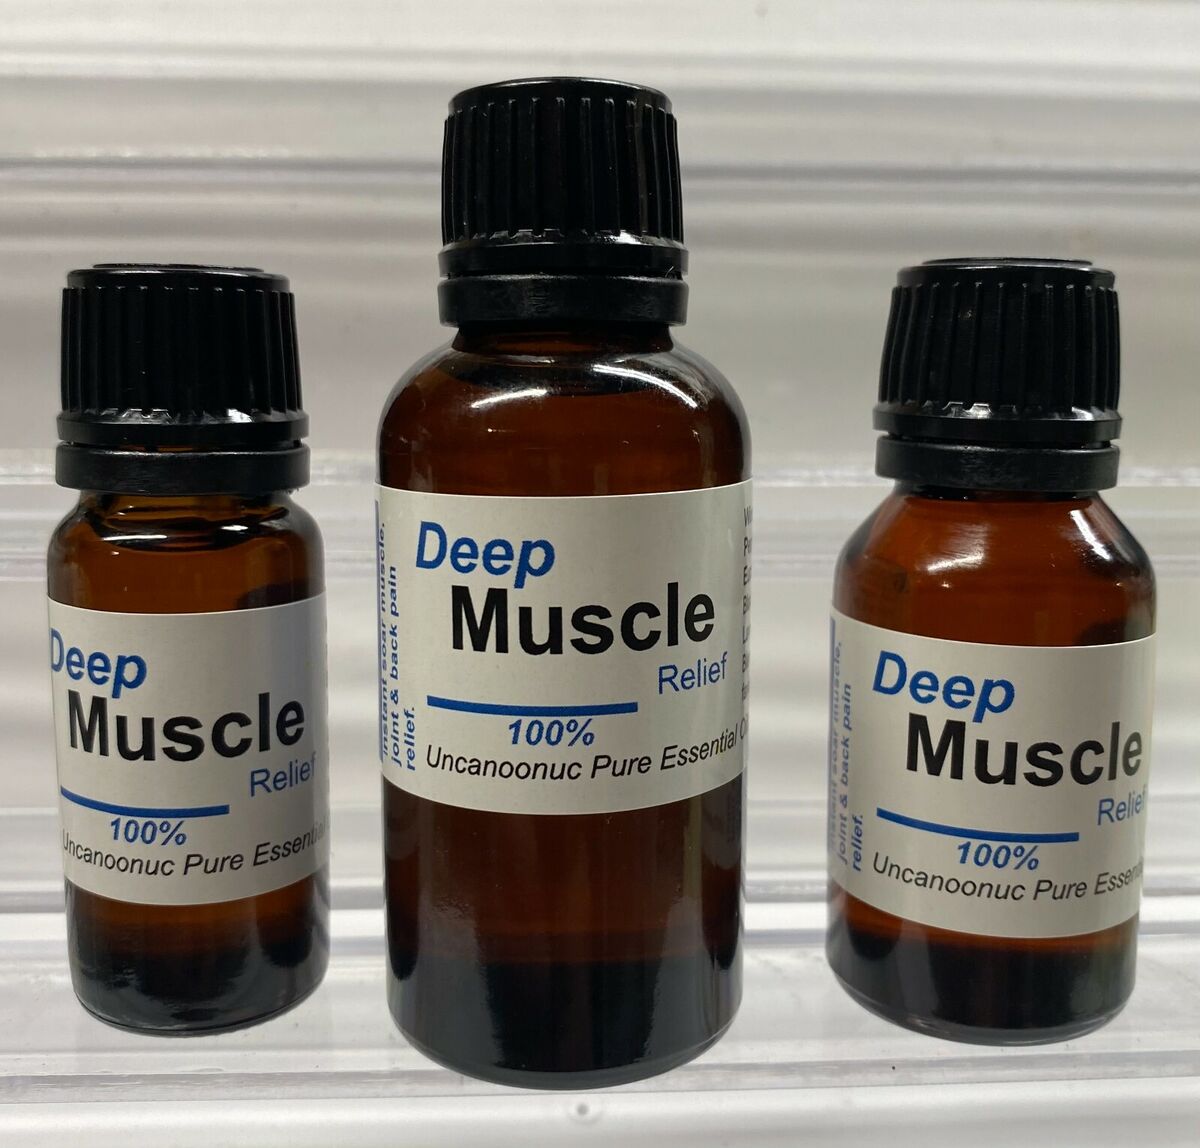 Deep Muscle Pain Relief 100% Pure Essential Oil Therapeutic Grade